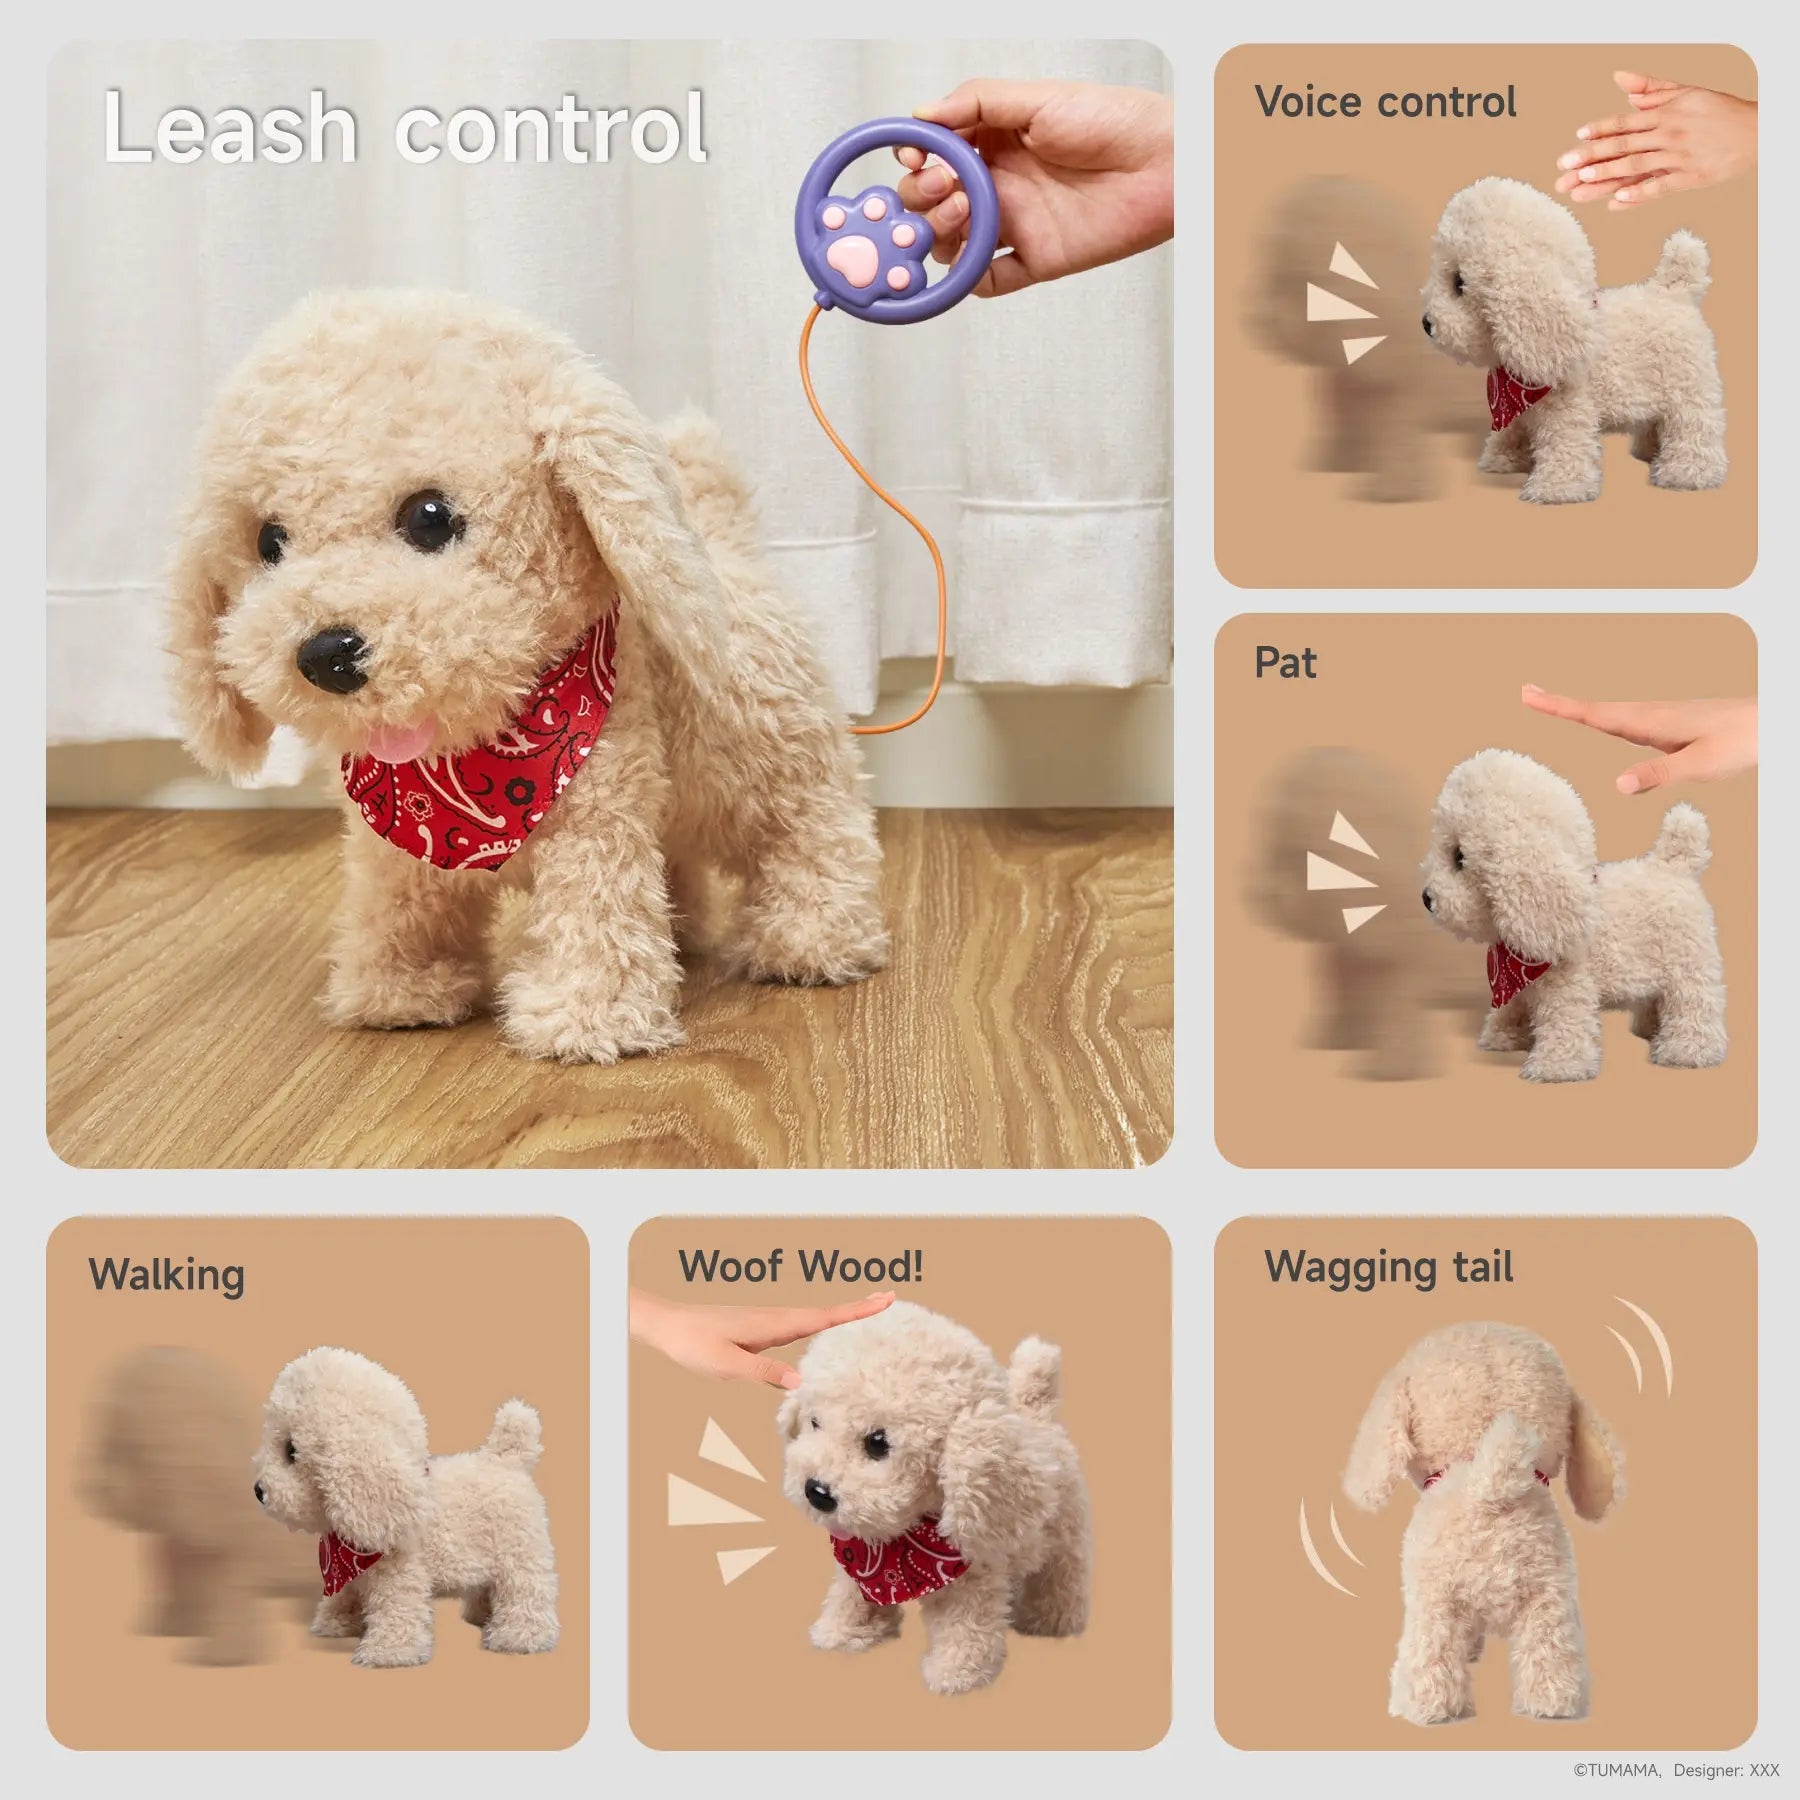 Fun interactive toys featuring walk, bark, sing functions